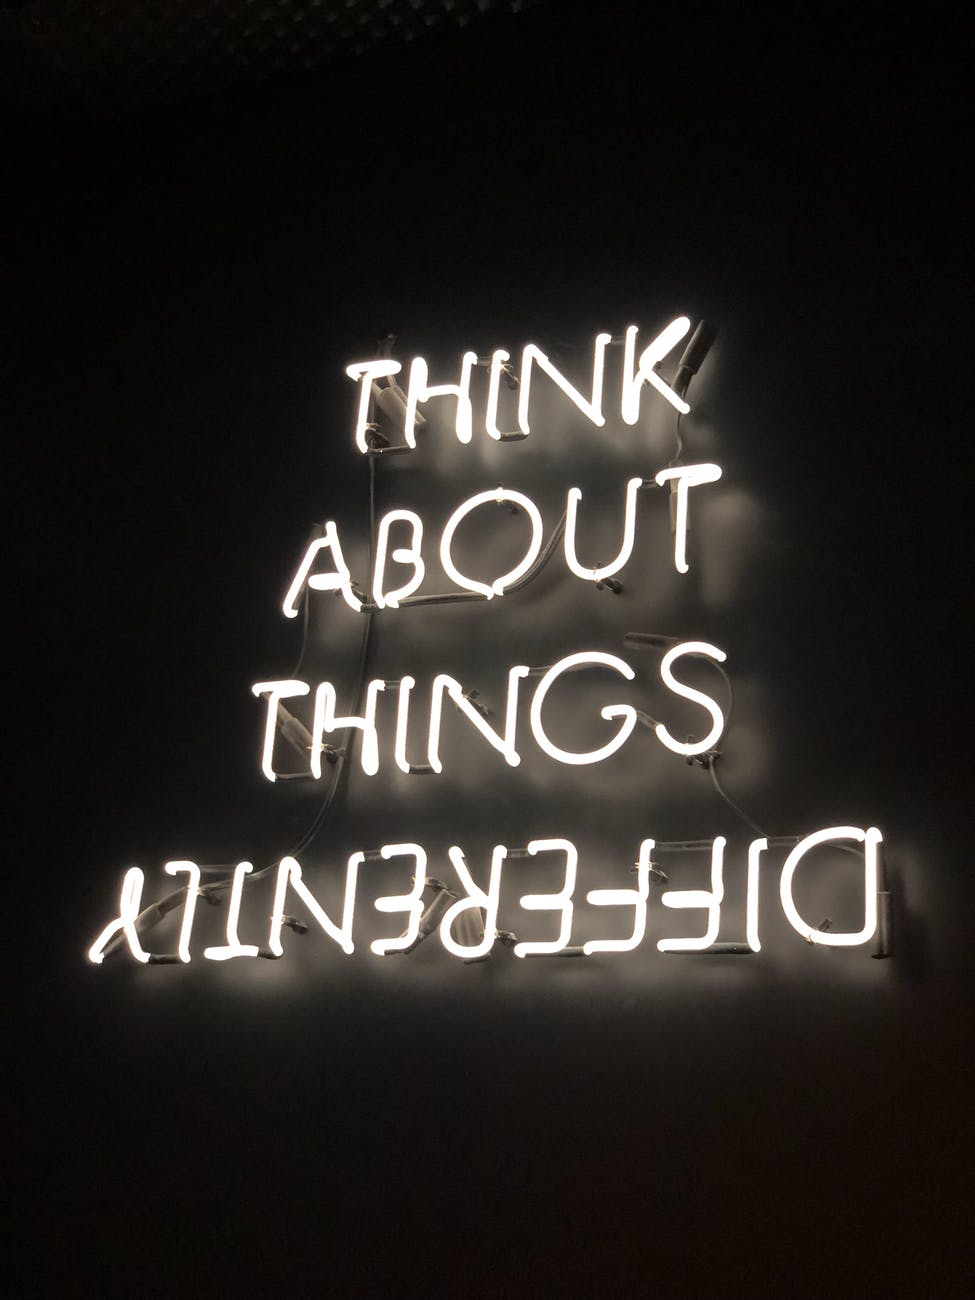 neon signage which shows the last word upside down to talk about different lenses of perspective for wrting your life story.